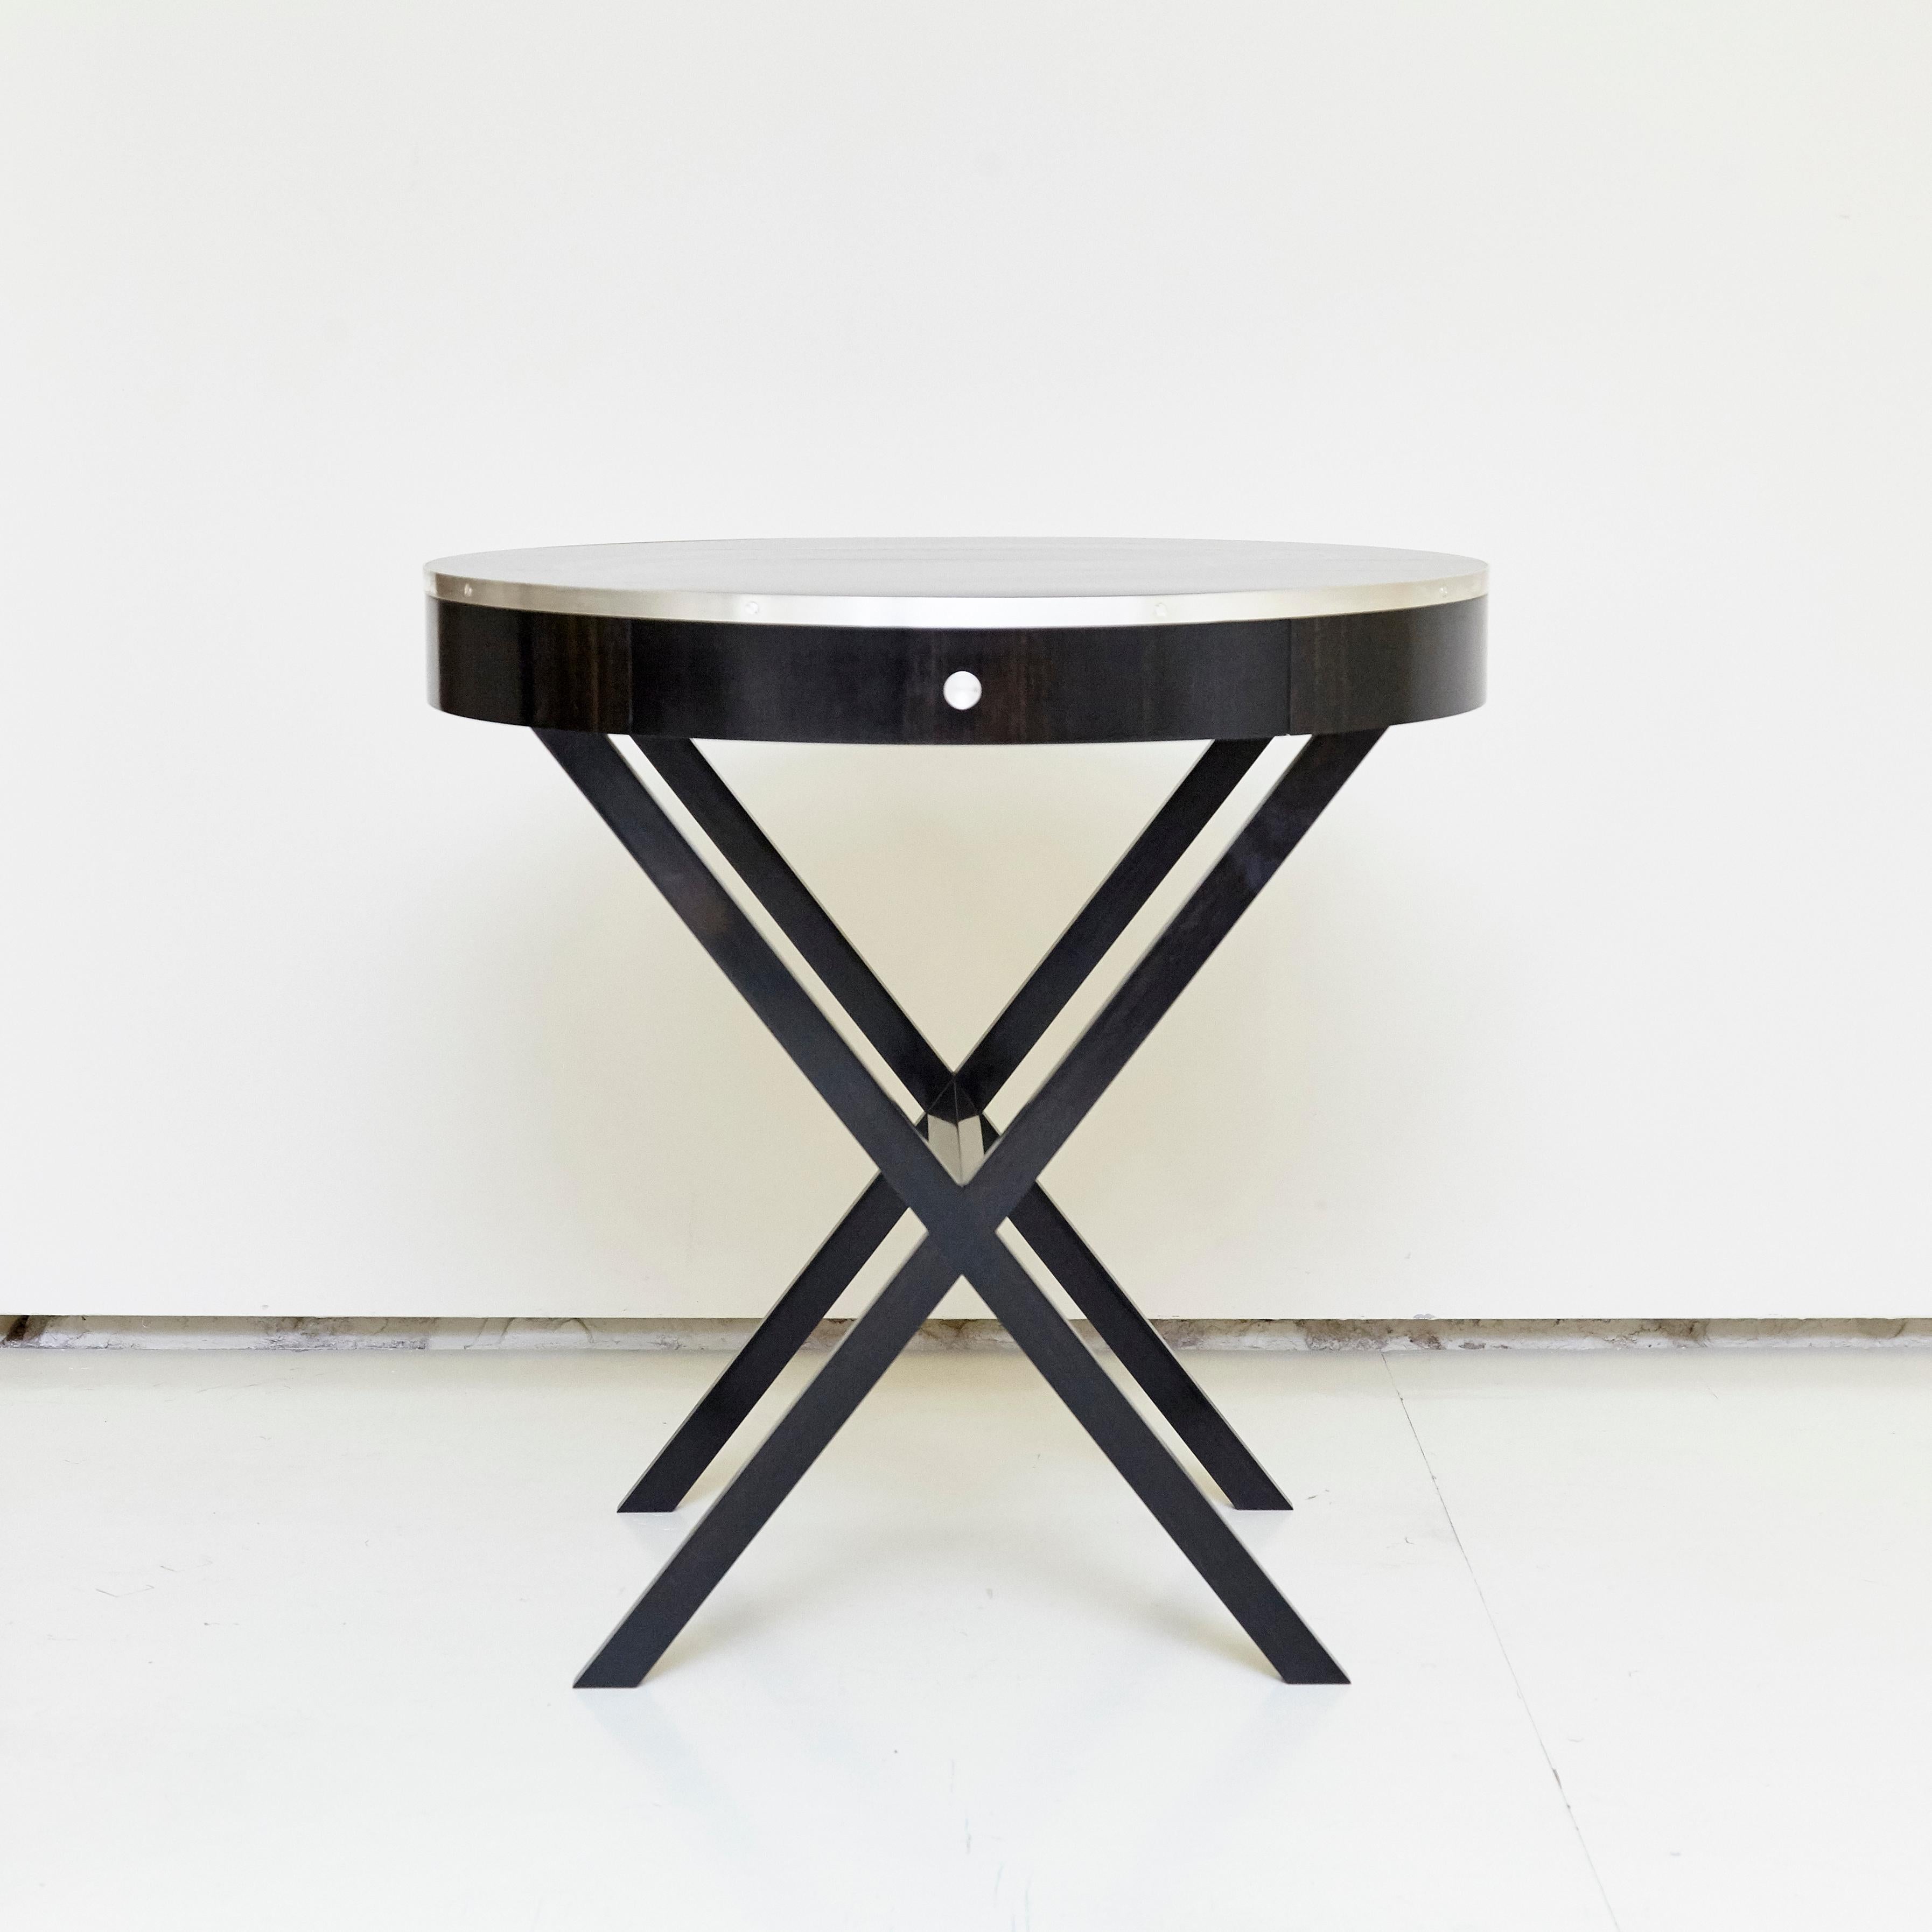 Side table manufactured by Anonymous in Barcelona.

Round side table in ebony and silver, one-drawer.

Measures: 65 cm x 65 cm.
   